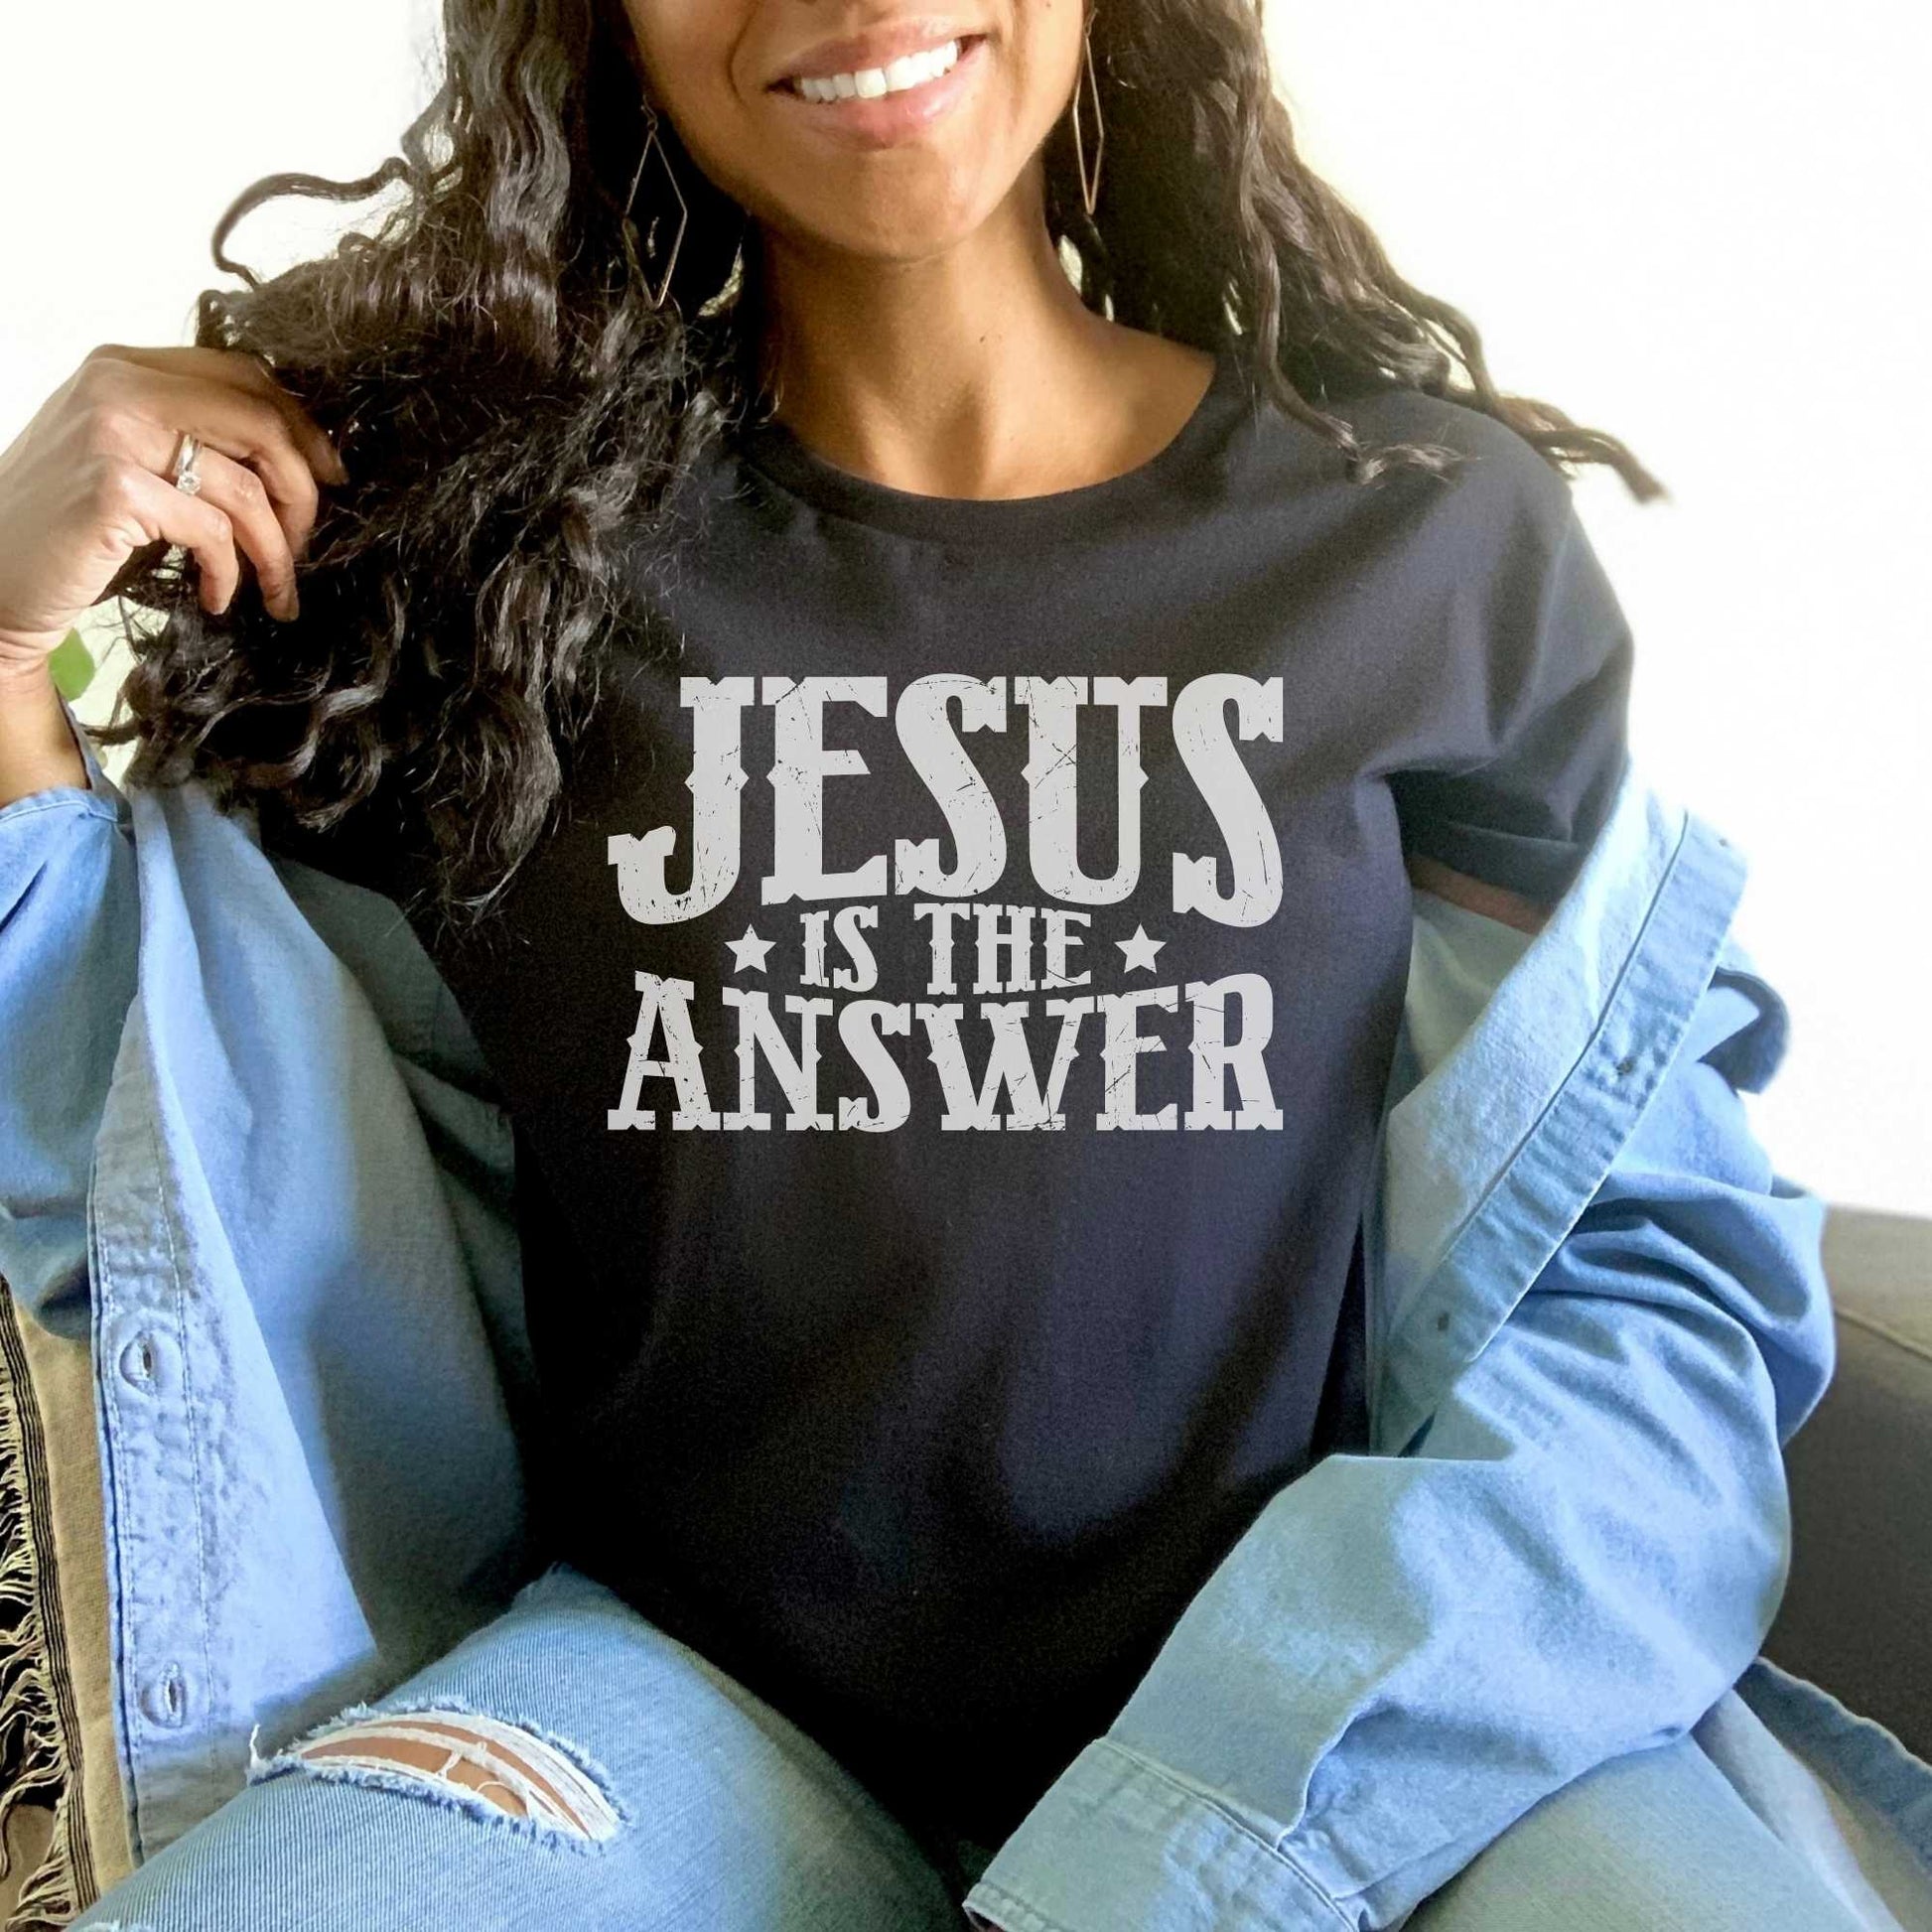 Jesus is the Answer, Faith Based Shirts for Men and Women